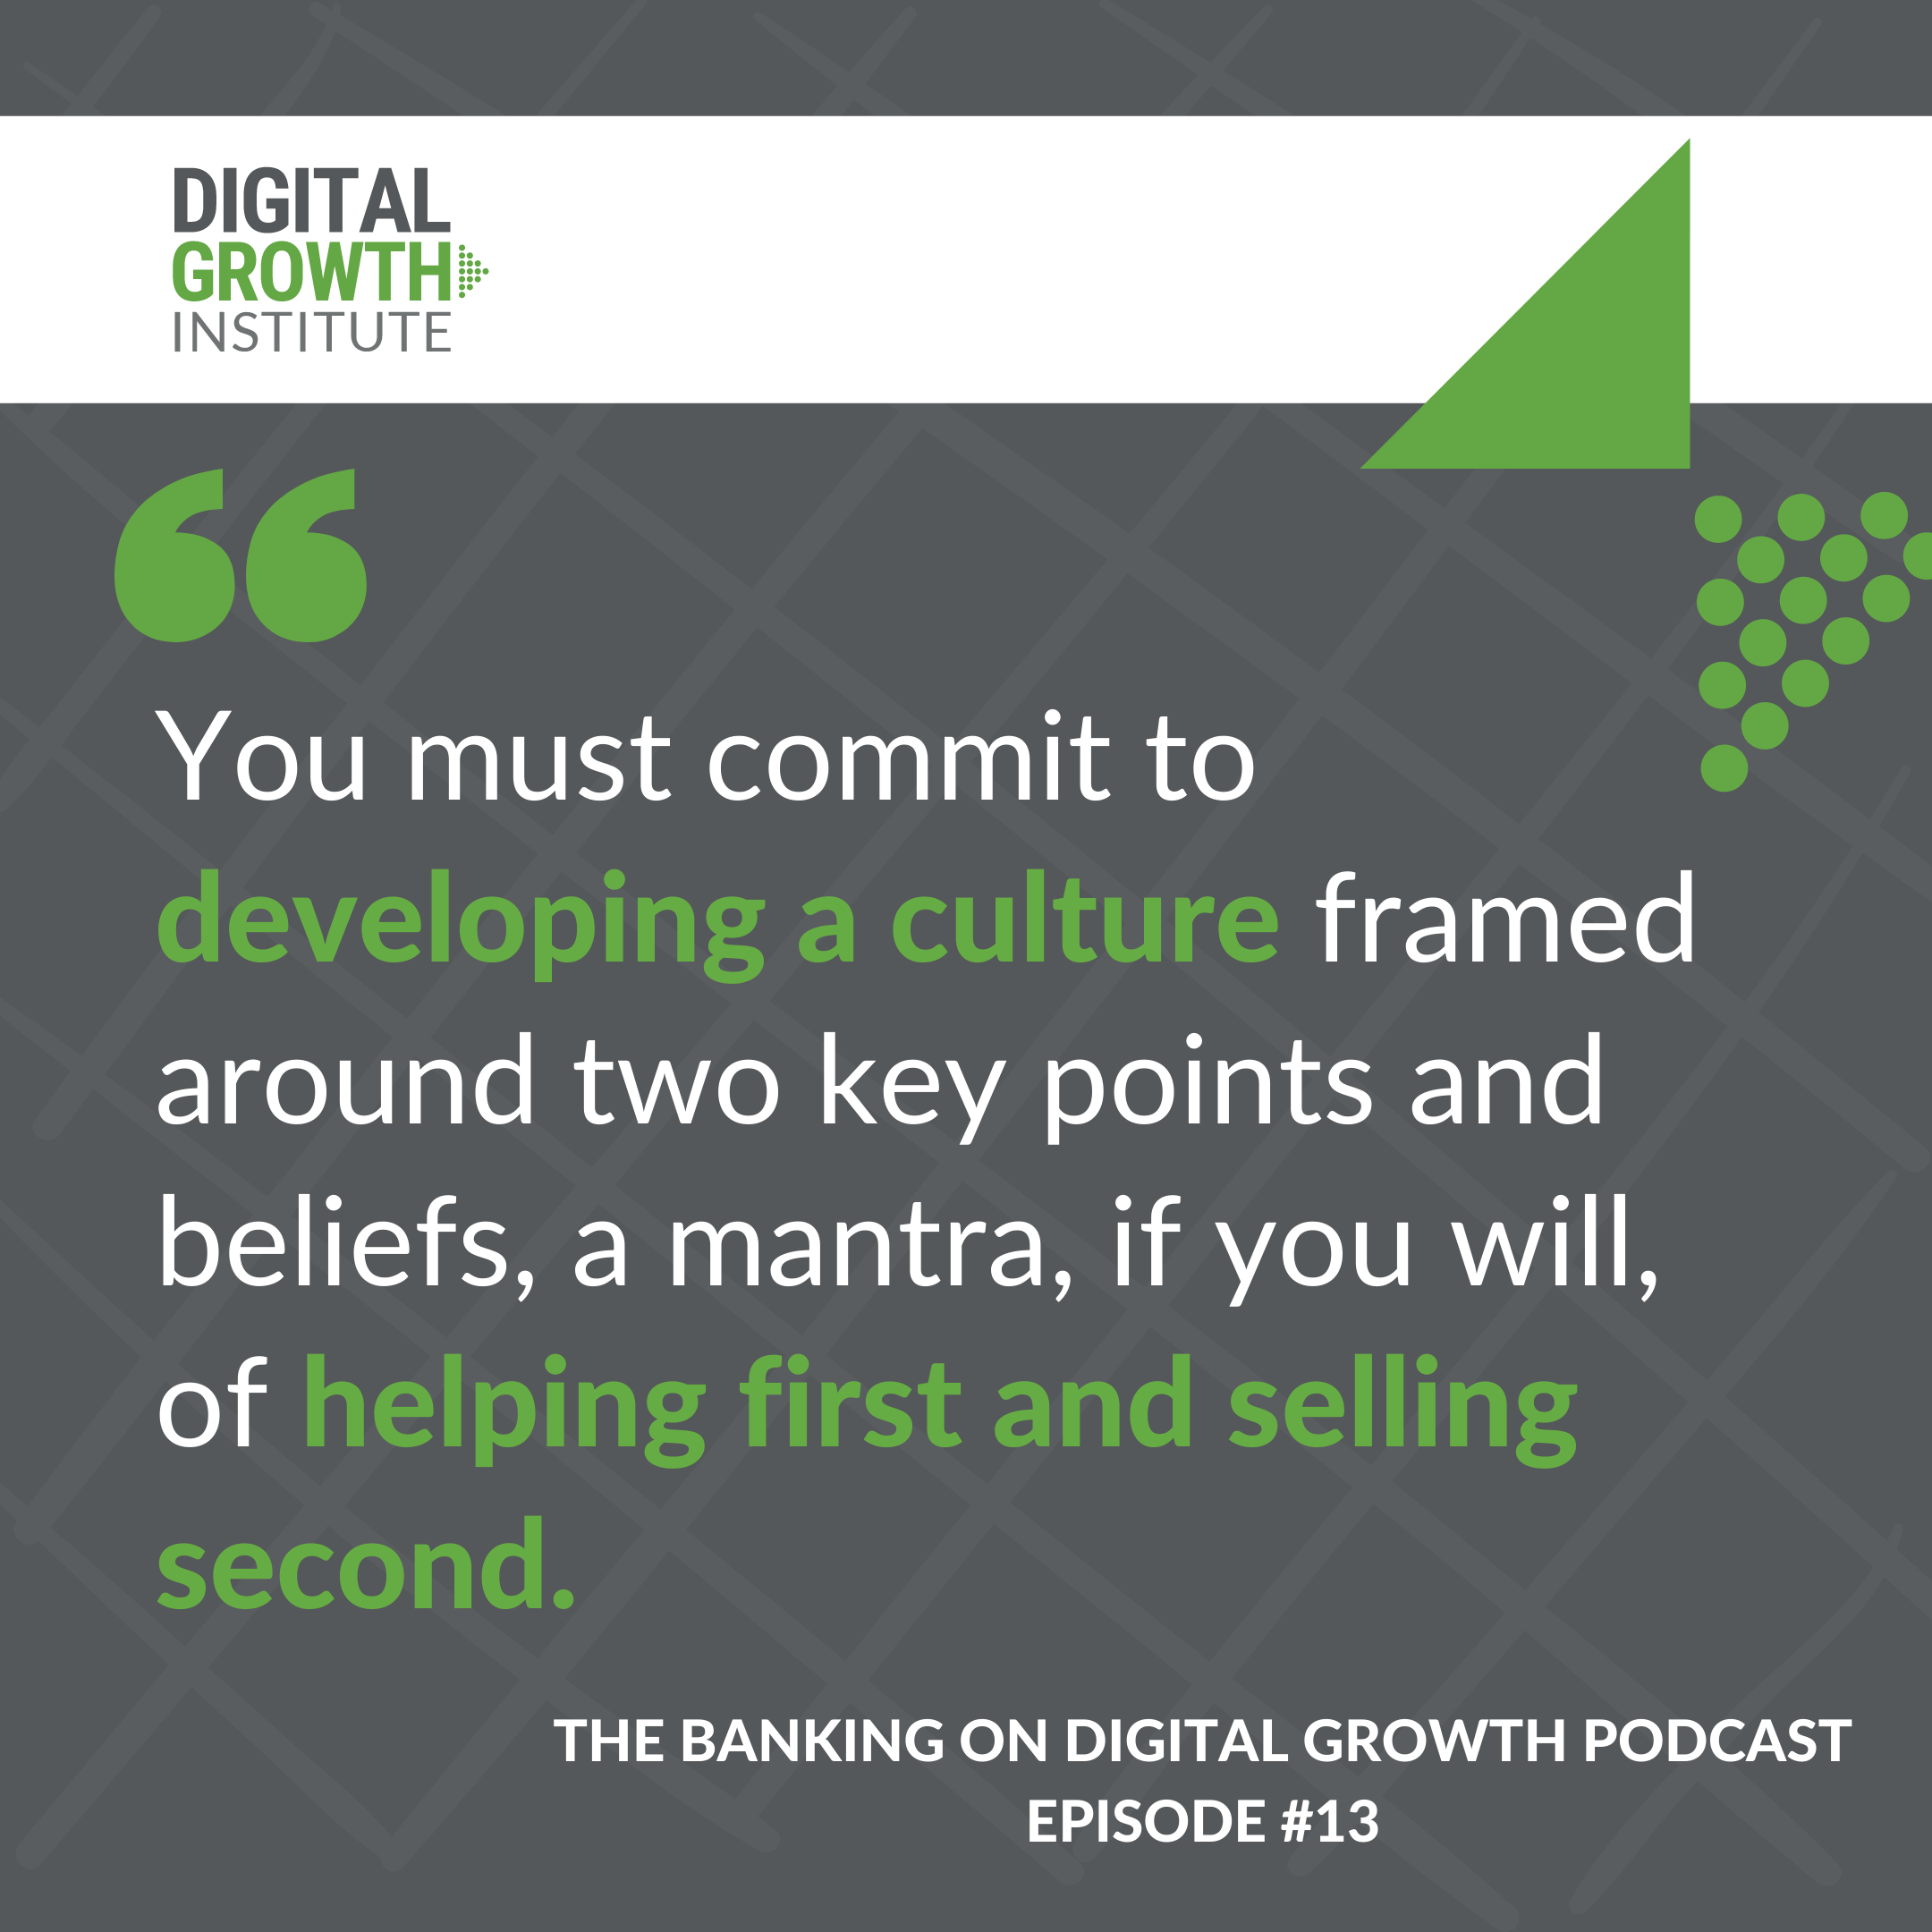 Marketing culture: help first, sell second